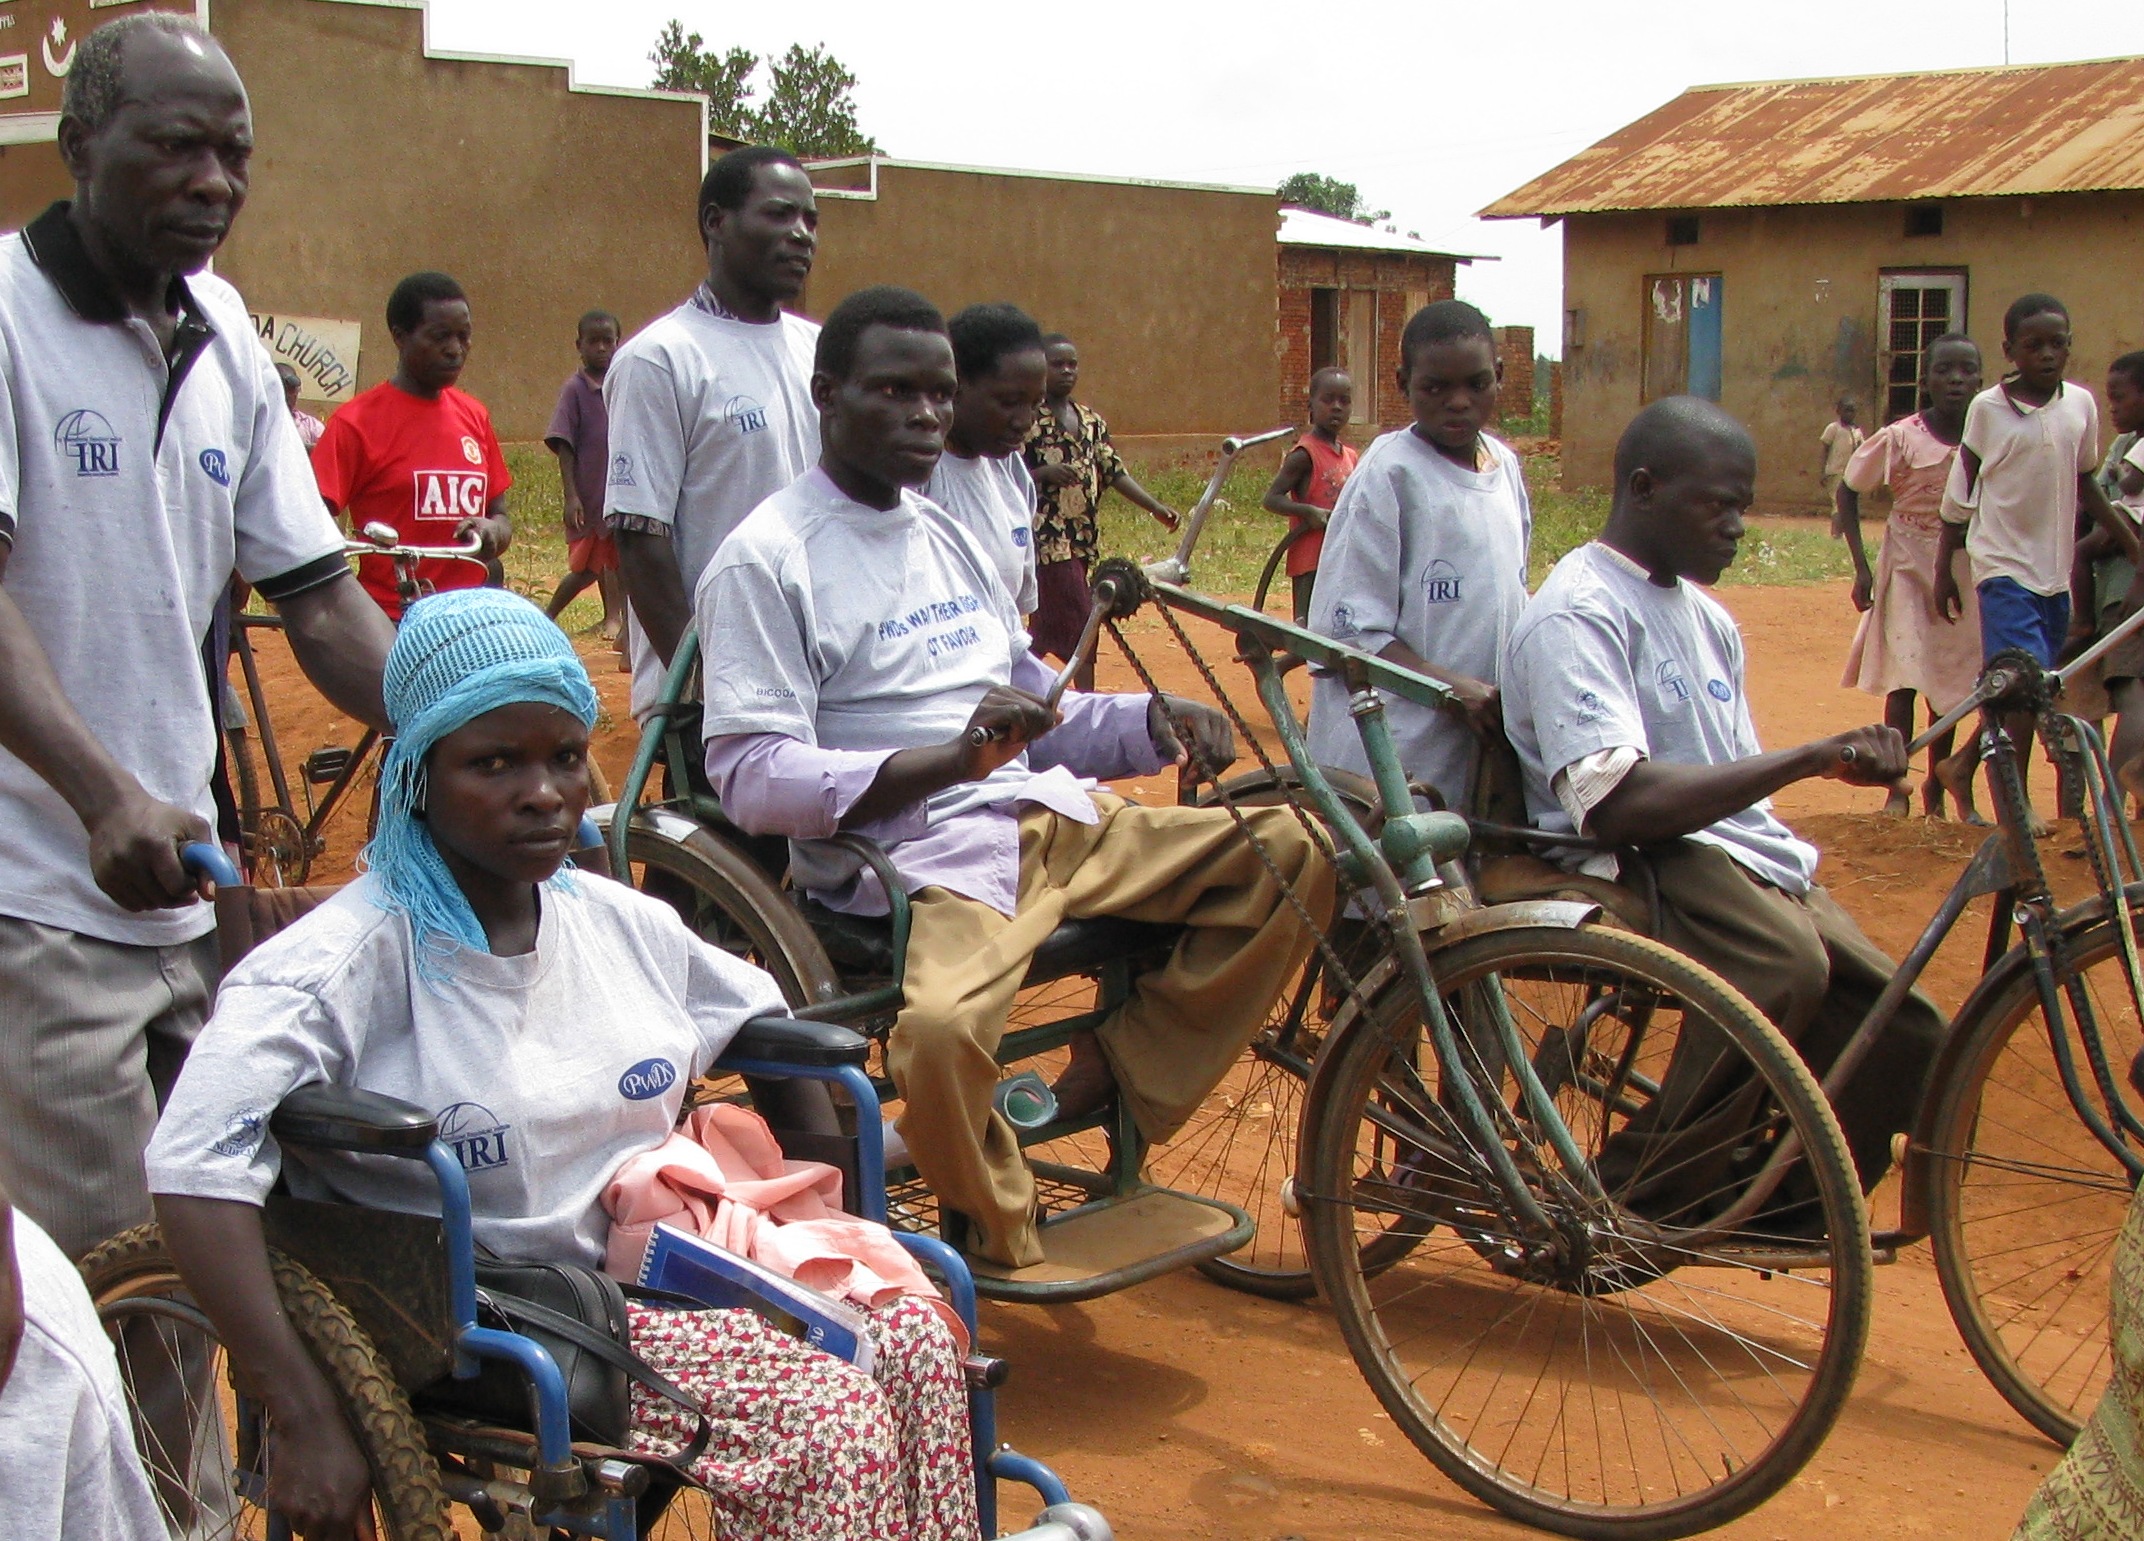 Persons with disabilities participating in a march in Uganda